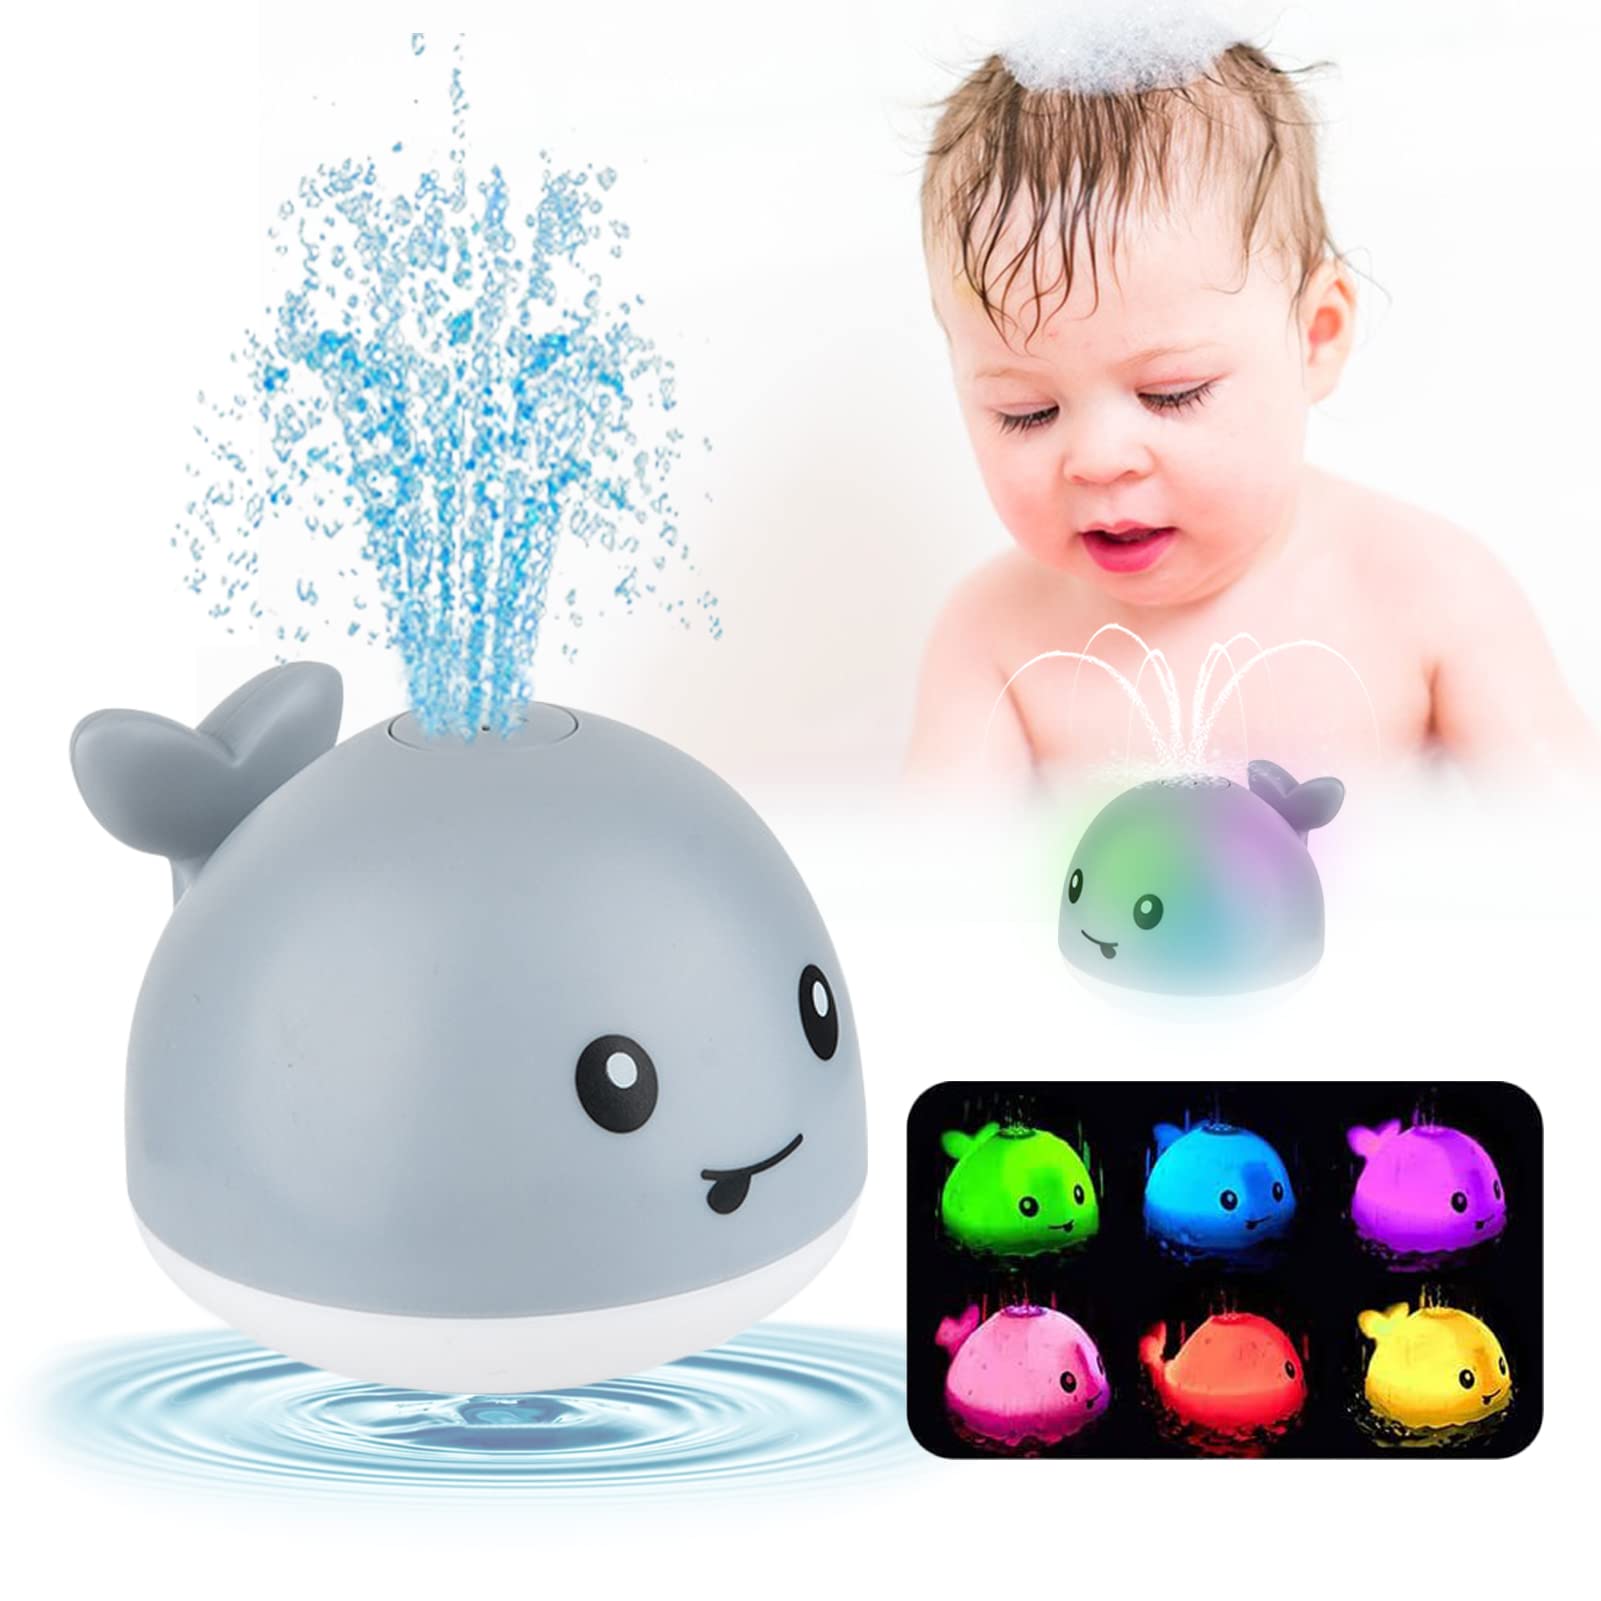 Bath Toys For Toddlers 1-3-Whale Bath Toy Sprinkler,Bath Toy For Infants 6-12 Months,Light Up Bath Toy For Toddlers Age 2-4 Induction Sprinkler Bathtub Shower Toys For Boys Girls Gift For Kids Age 1-6